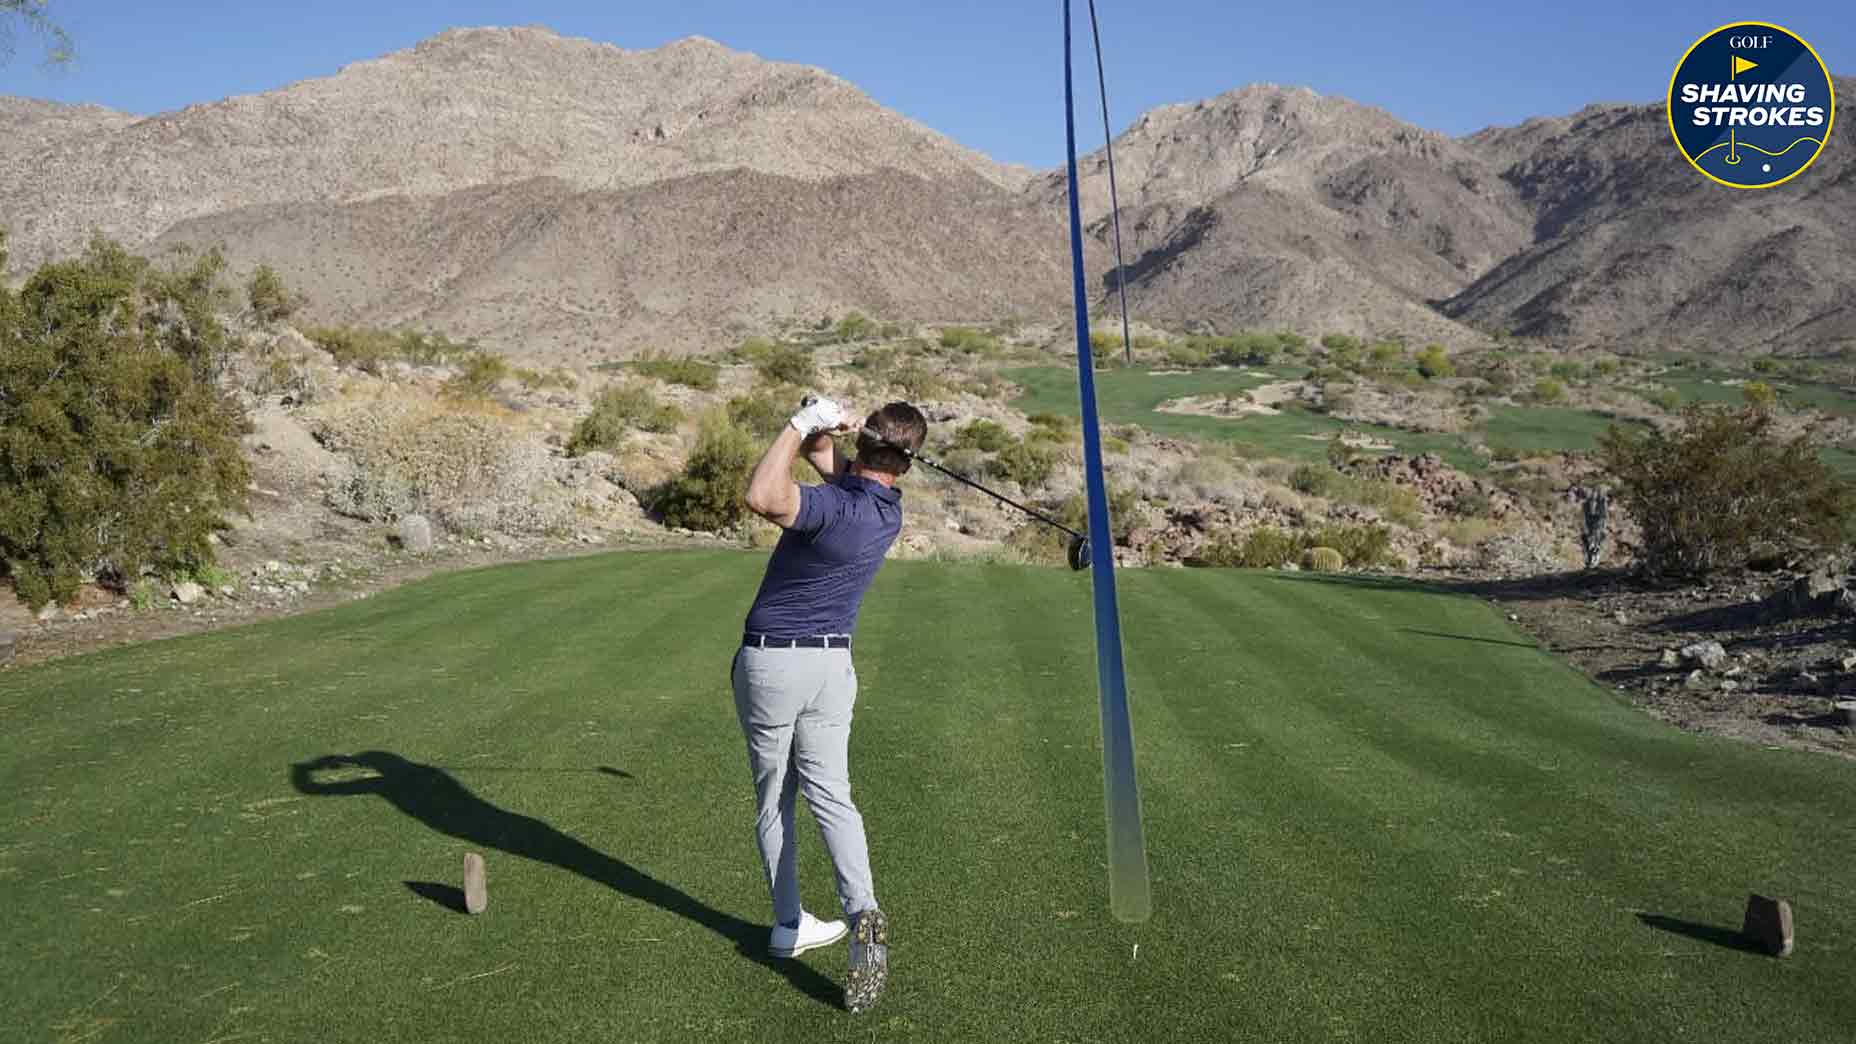 When you've got a difficult shot, these 11 mental tricks can calm nerves and put you into performance mode, says top teacher David Woods